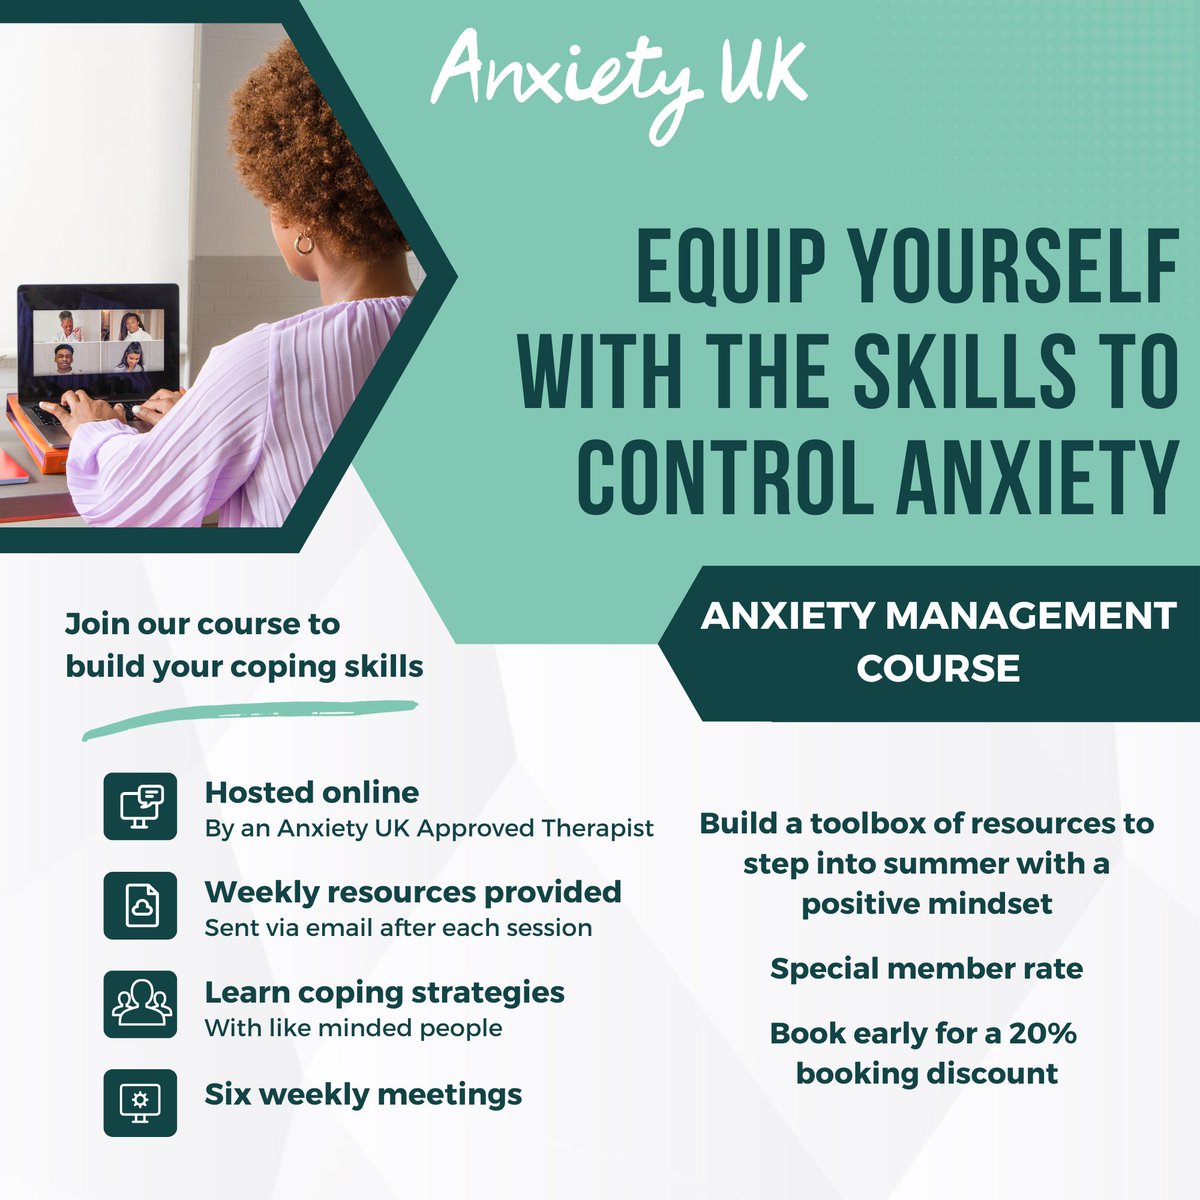 Learn coping strategies and connect with like-minded individuals who get it, on one of our next Anxiety Management courses! For more information, see here: anxietyuk.org.uk/products/uncat… #anxietymanagement #therapistledcourse